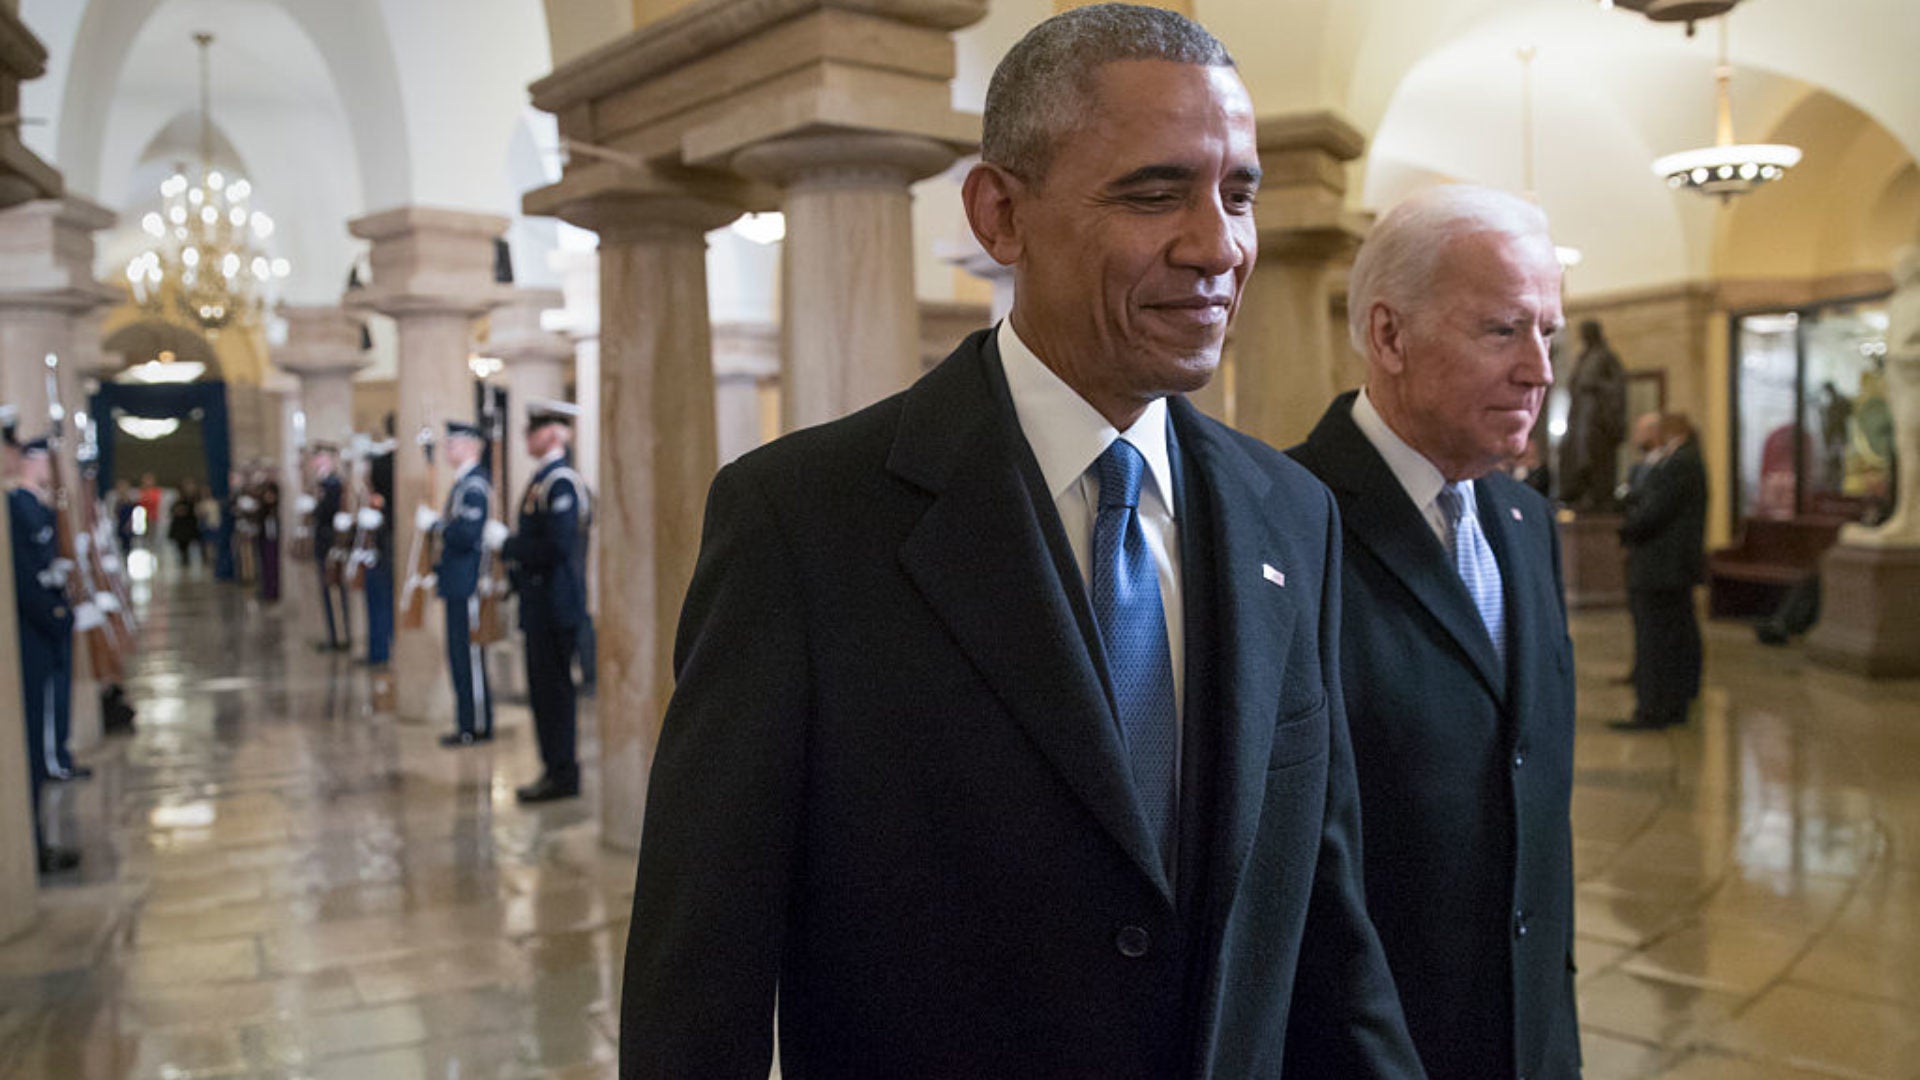 Biden Claims That He Doesn't Need Barack Obama's Endorsement To Win